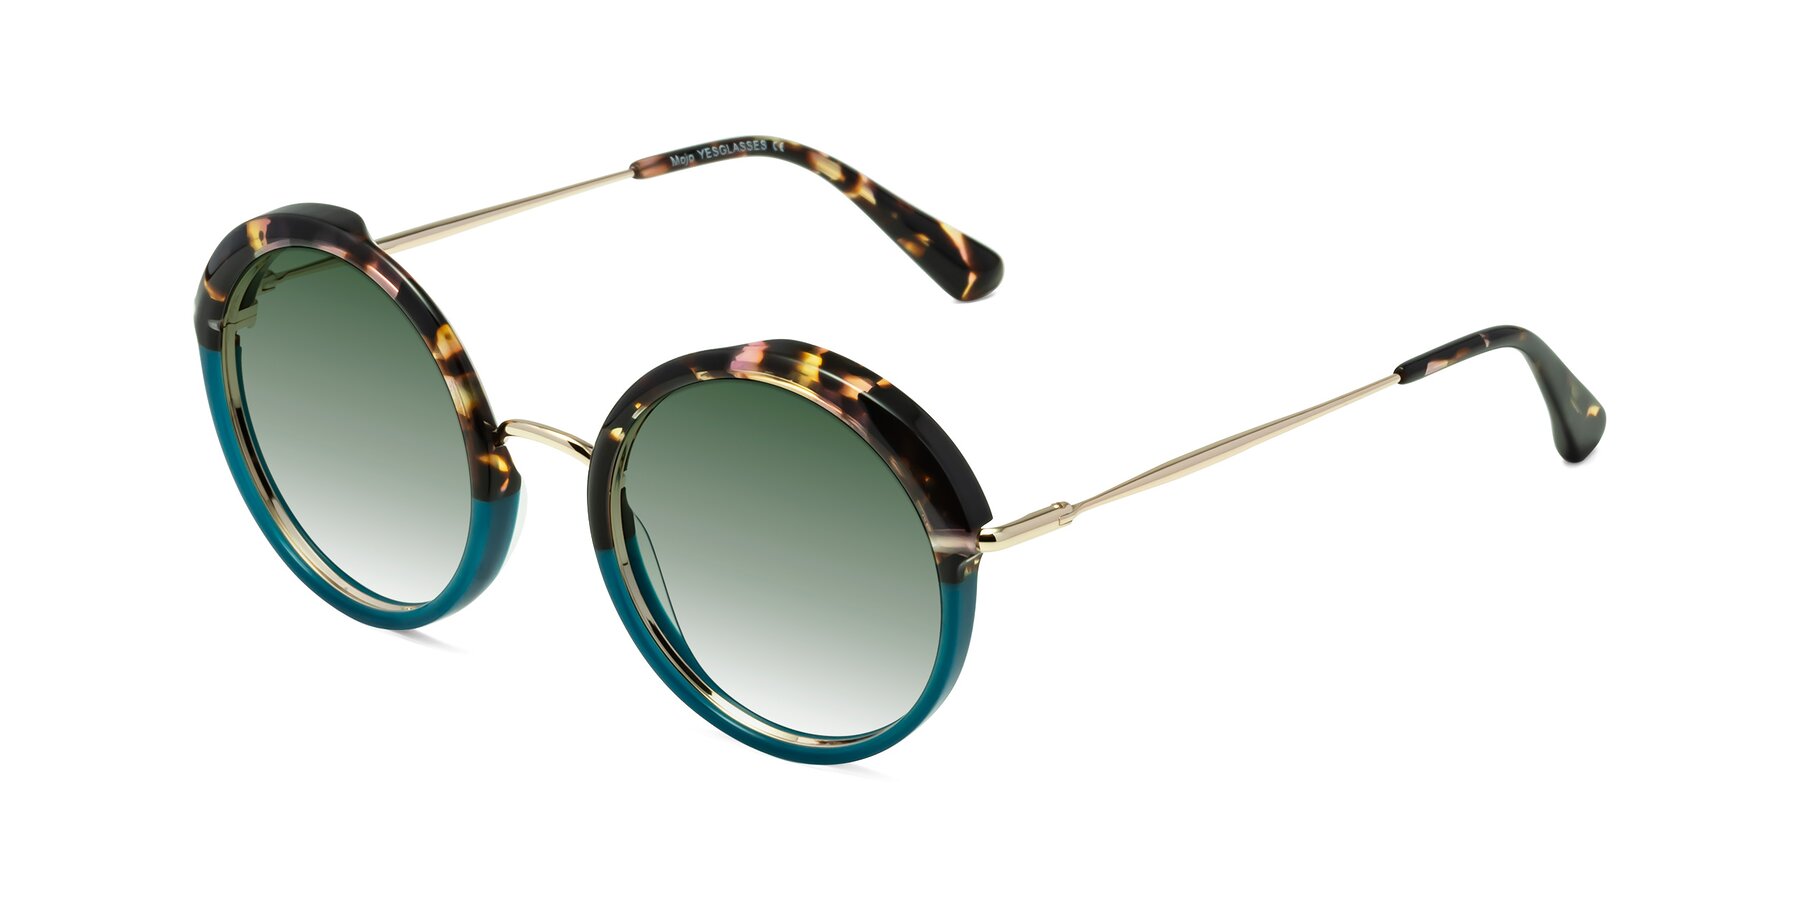 Angle of Mojo in Floral-Teal with Green Gradient Lenses